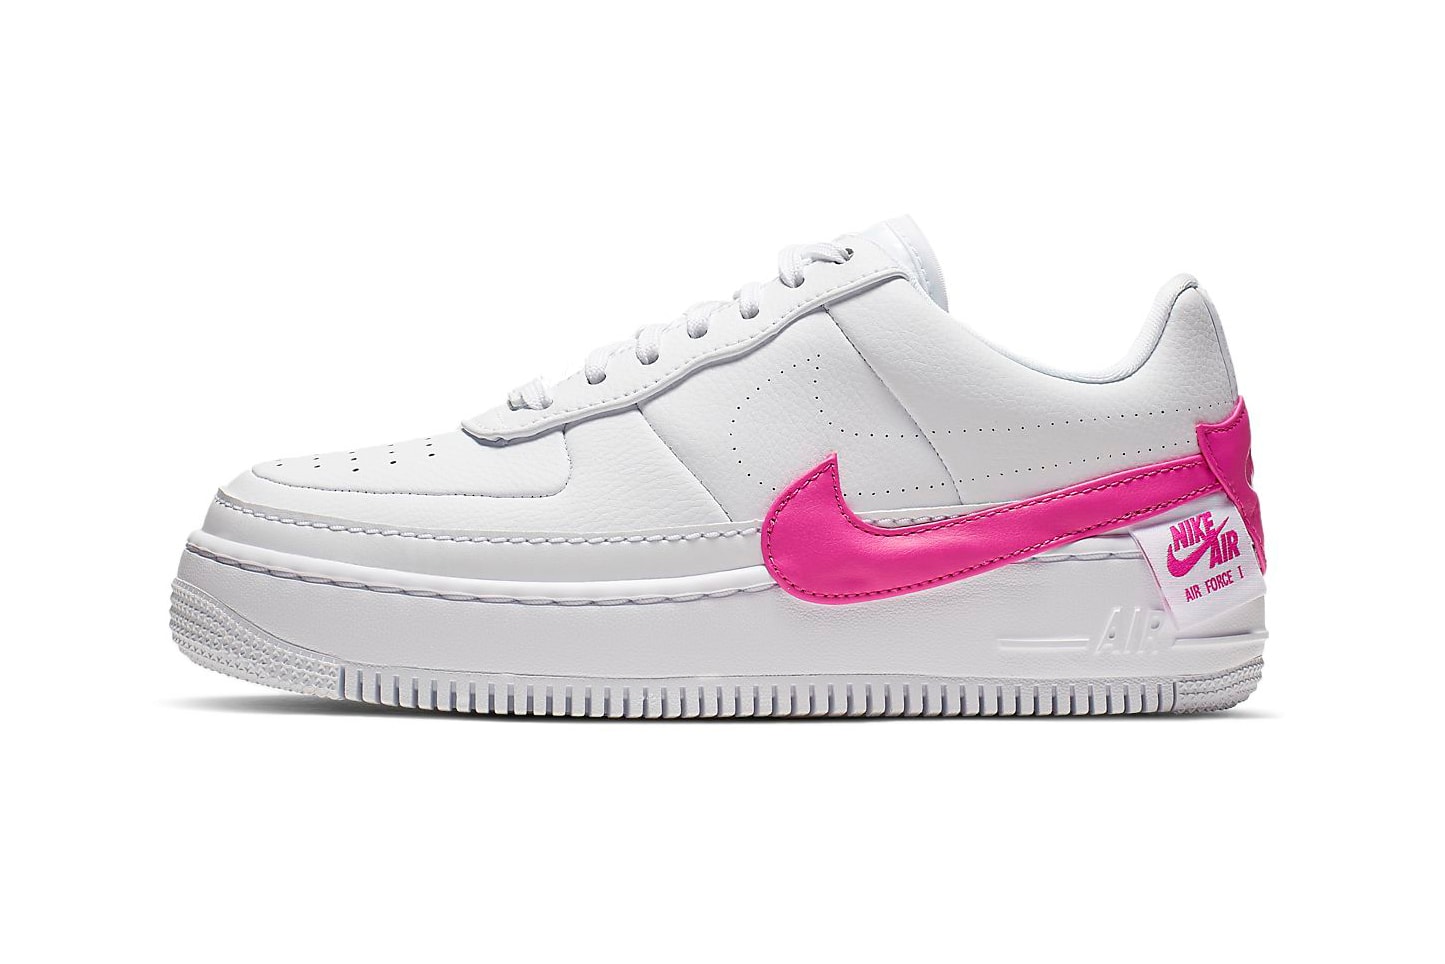 Nike Air Force 1 Jester XX Laser Fuchsia Pink Swoosh White Sneakers Trainers